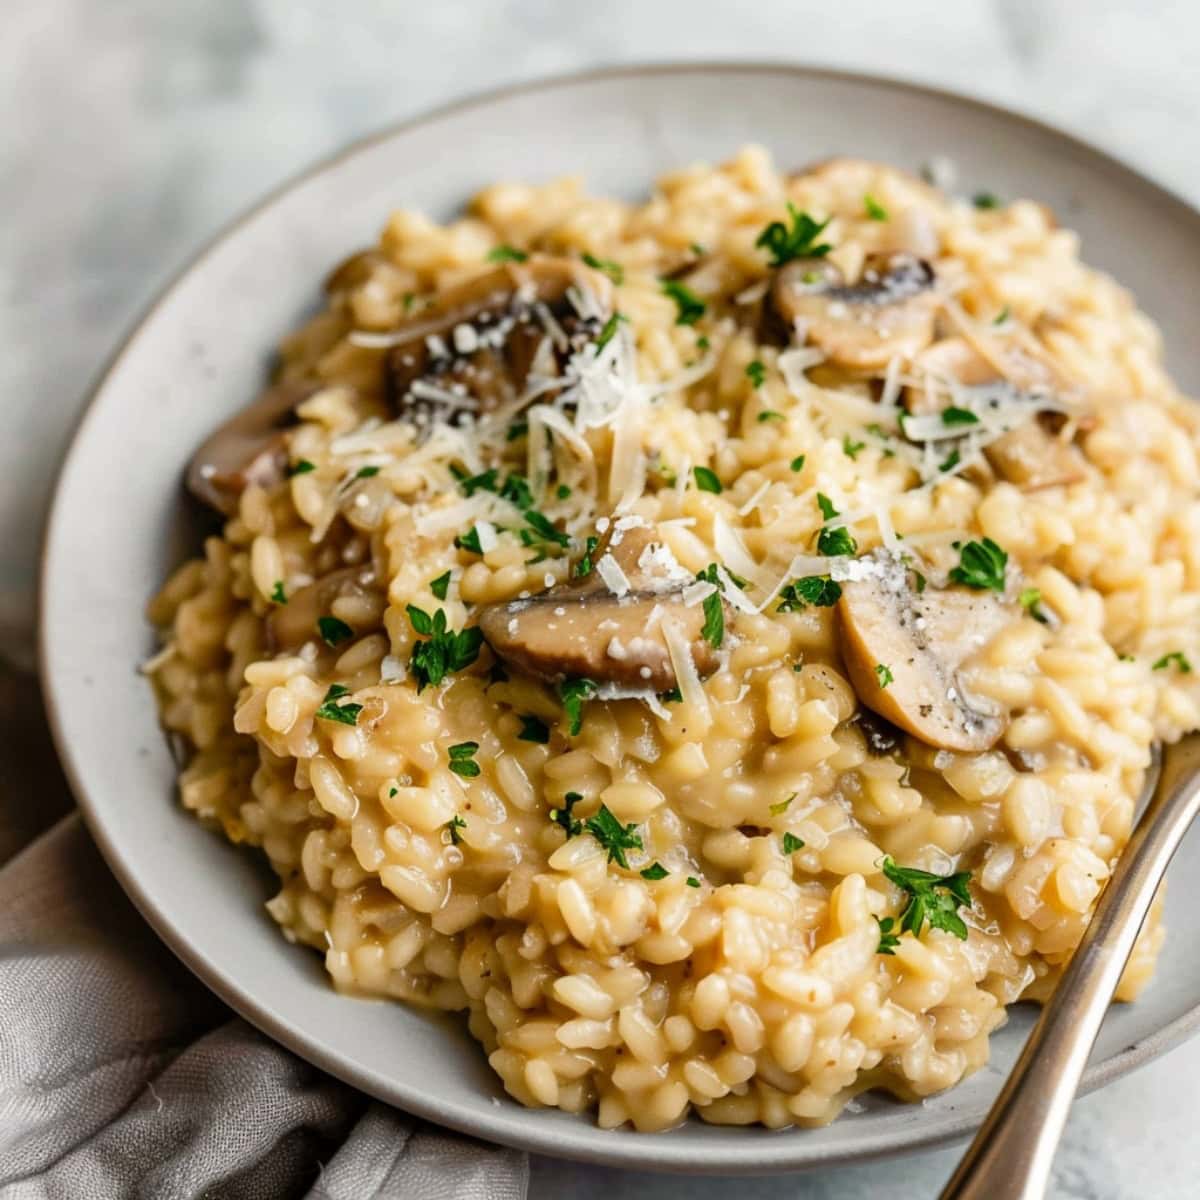 A creamy mushroom risotto, highlighting the tender Arborio rice, garnished with parsley and parmesan.